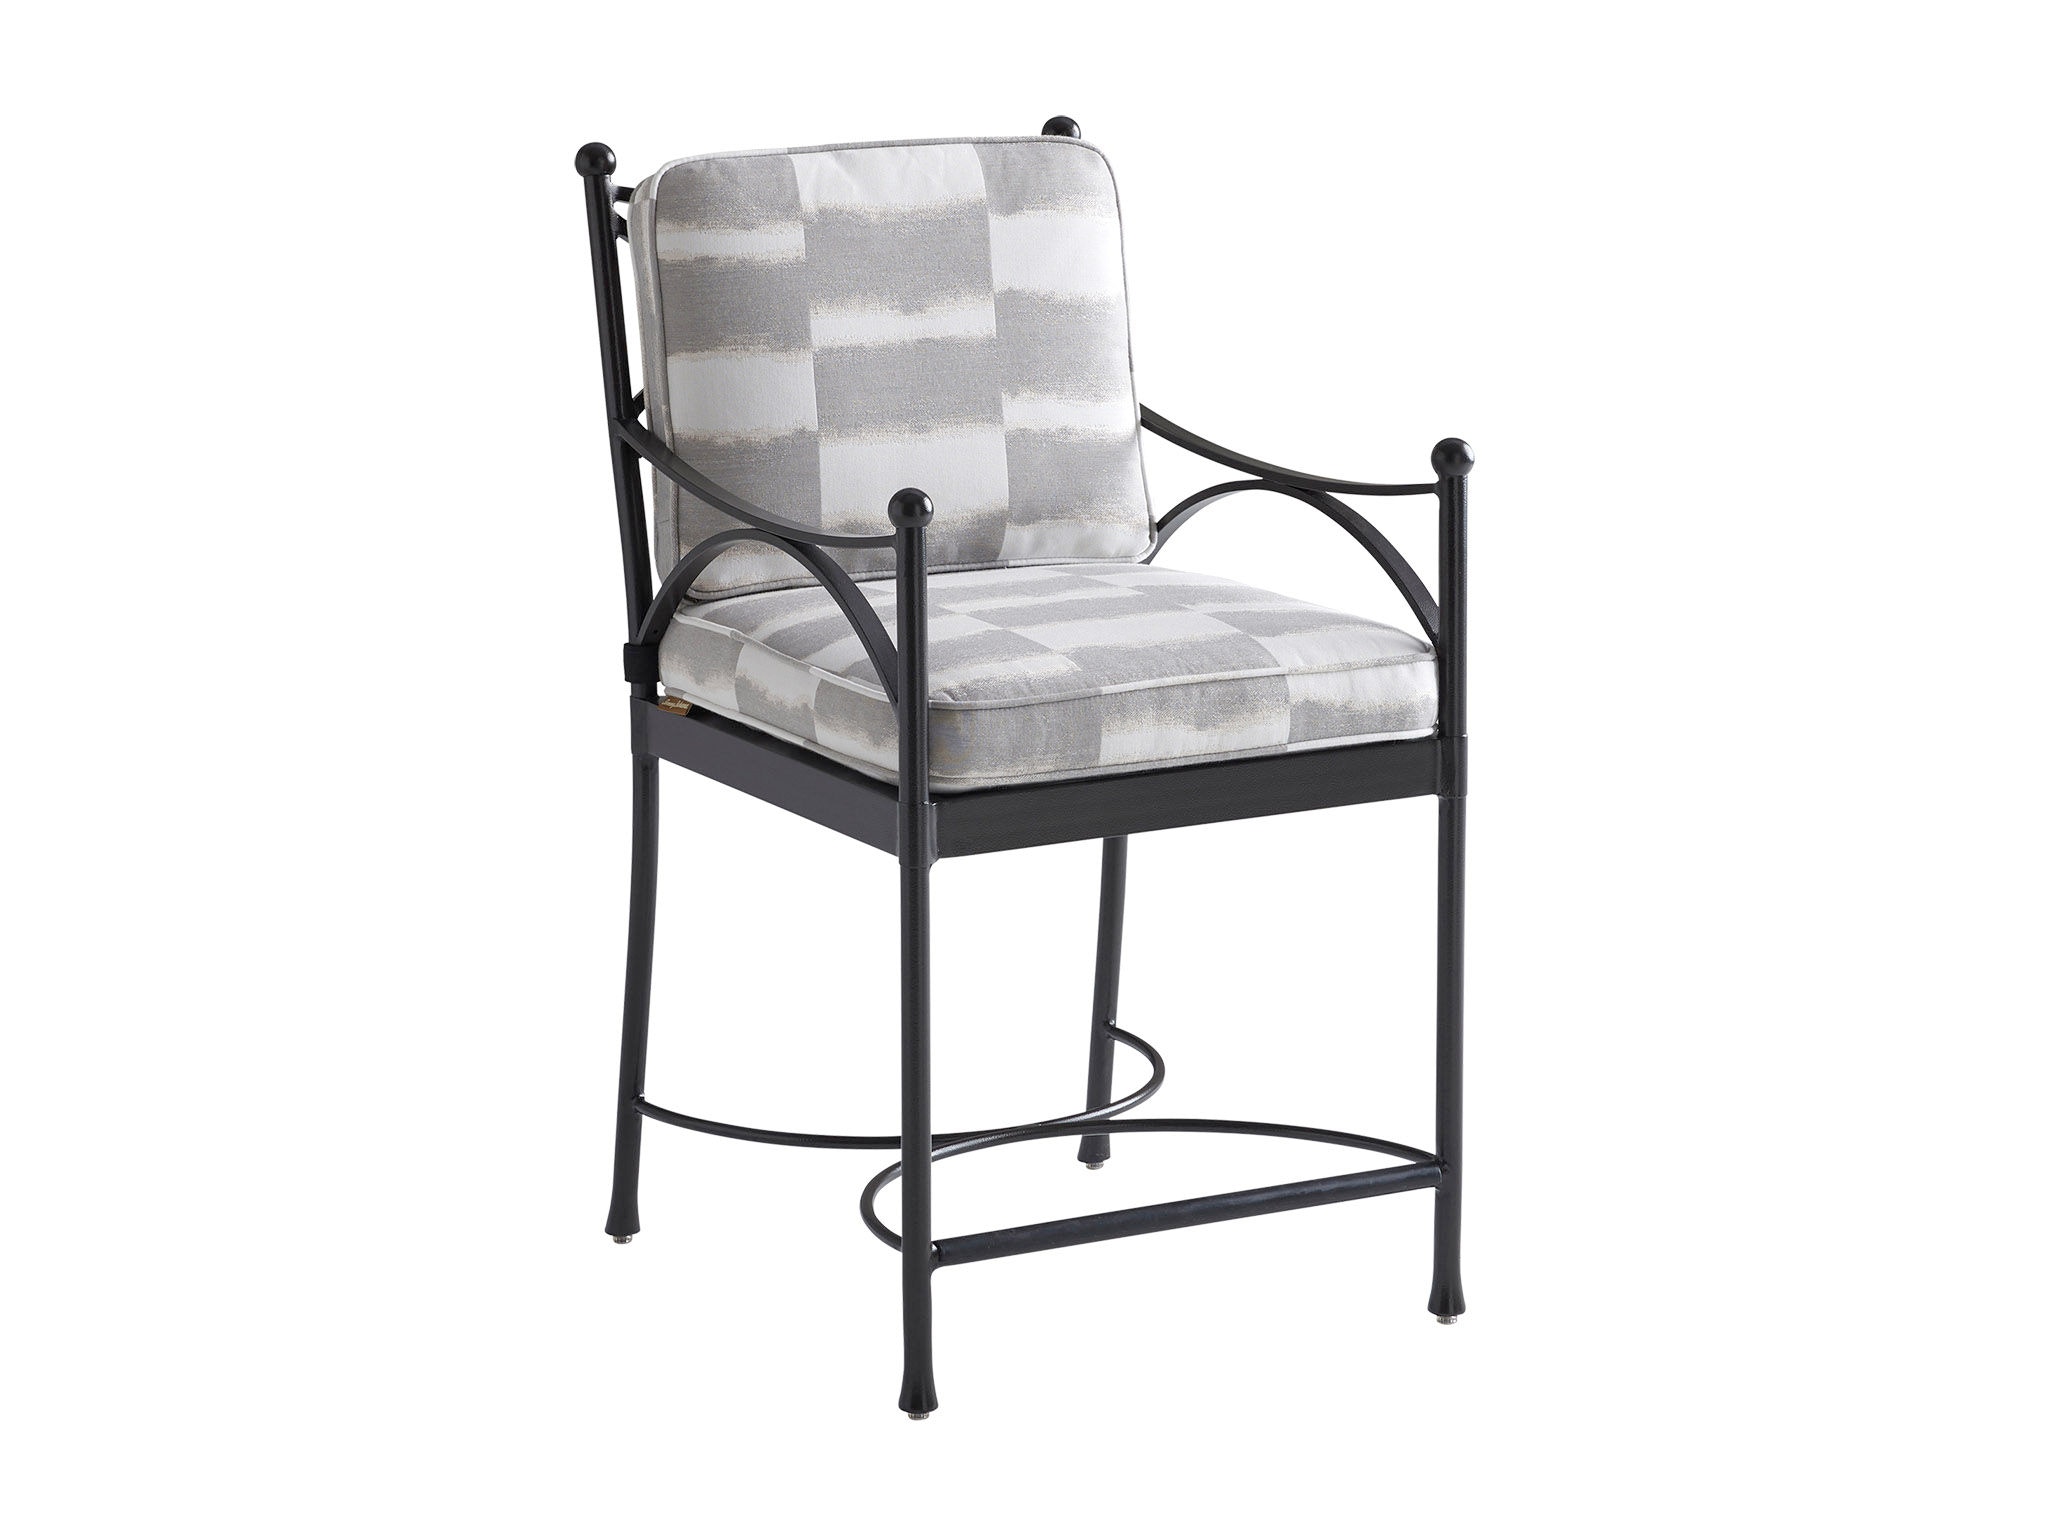 Tommy Bahama Pavlova Outdoor Lounge Chair in Textured Graphite/Printed Cushion 